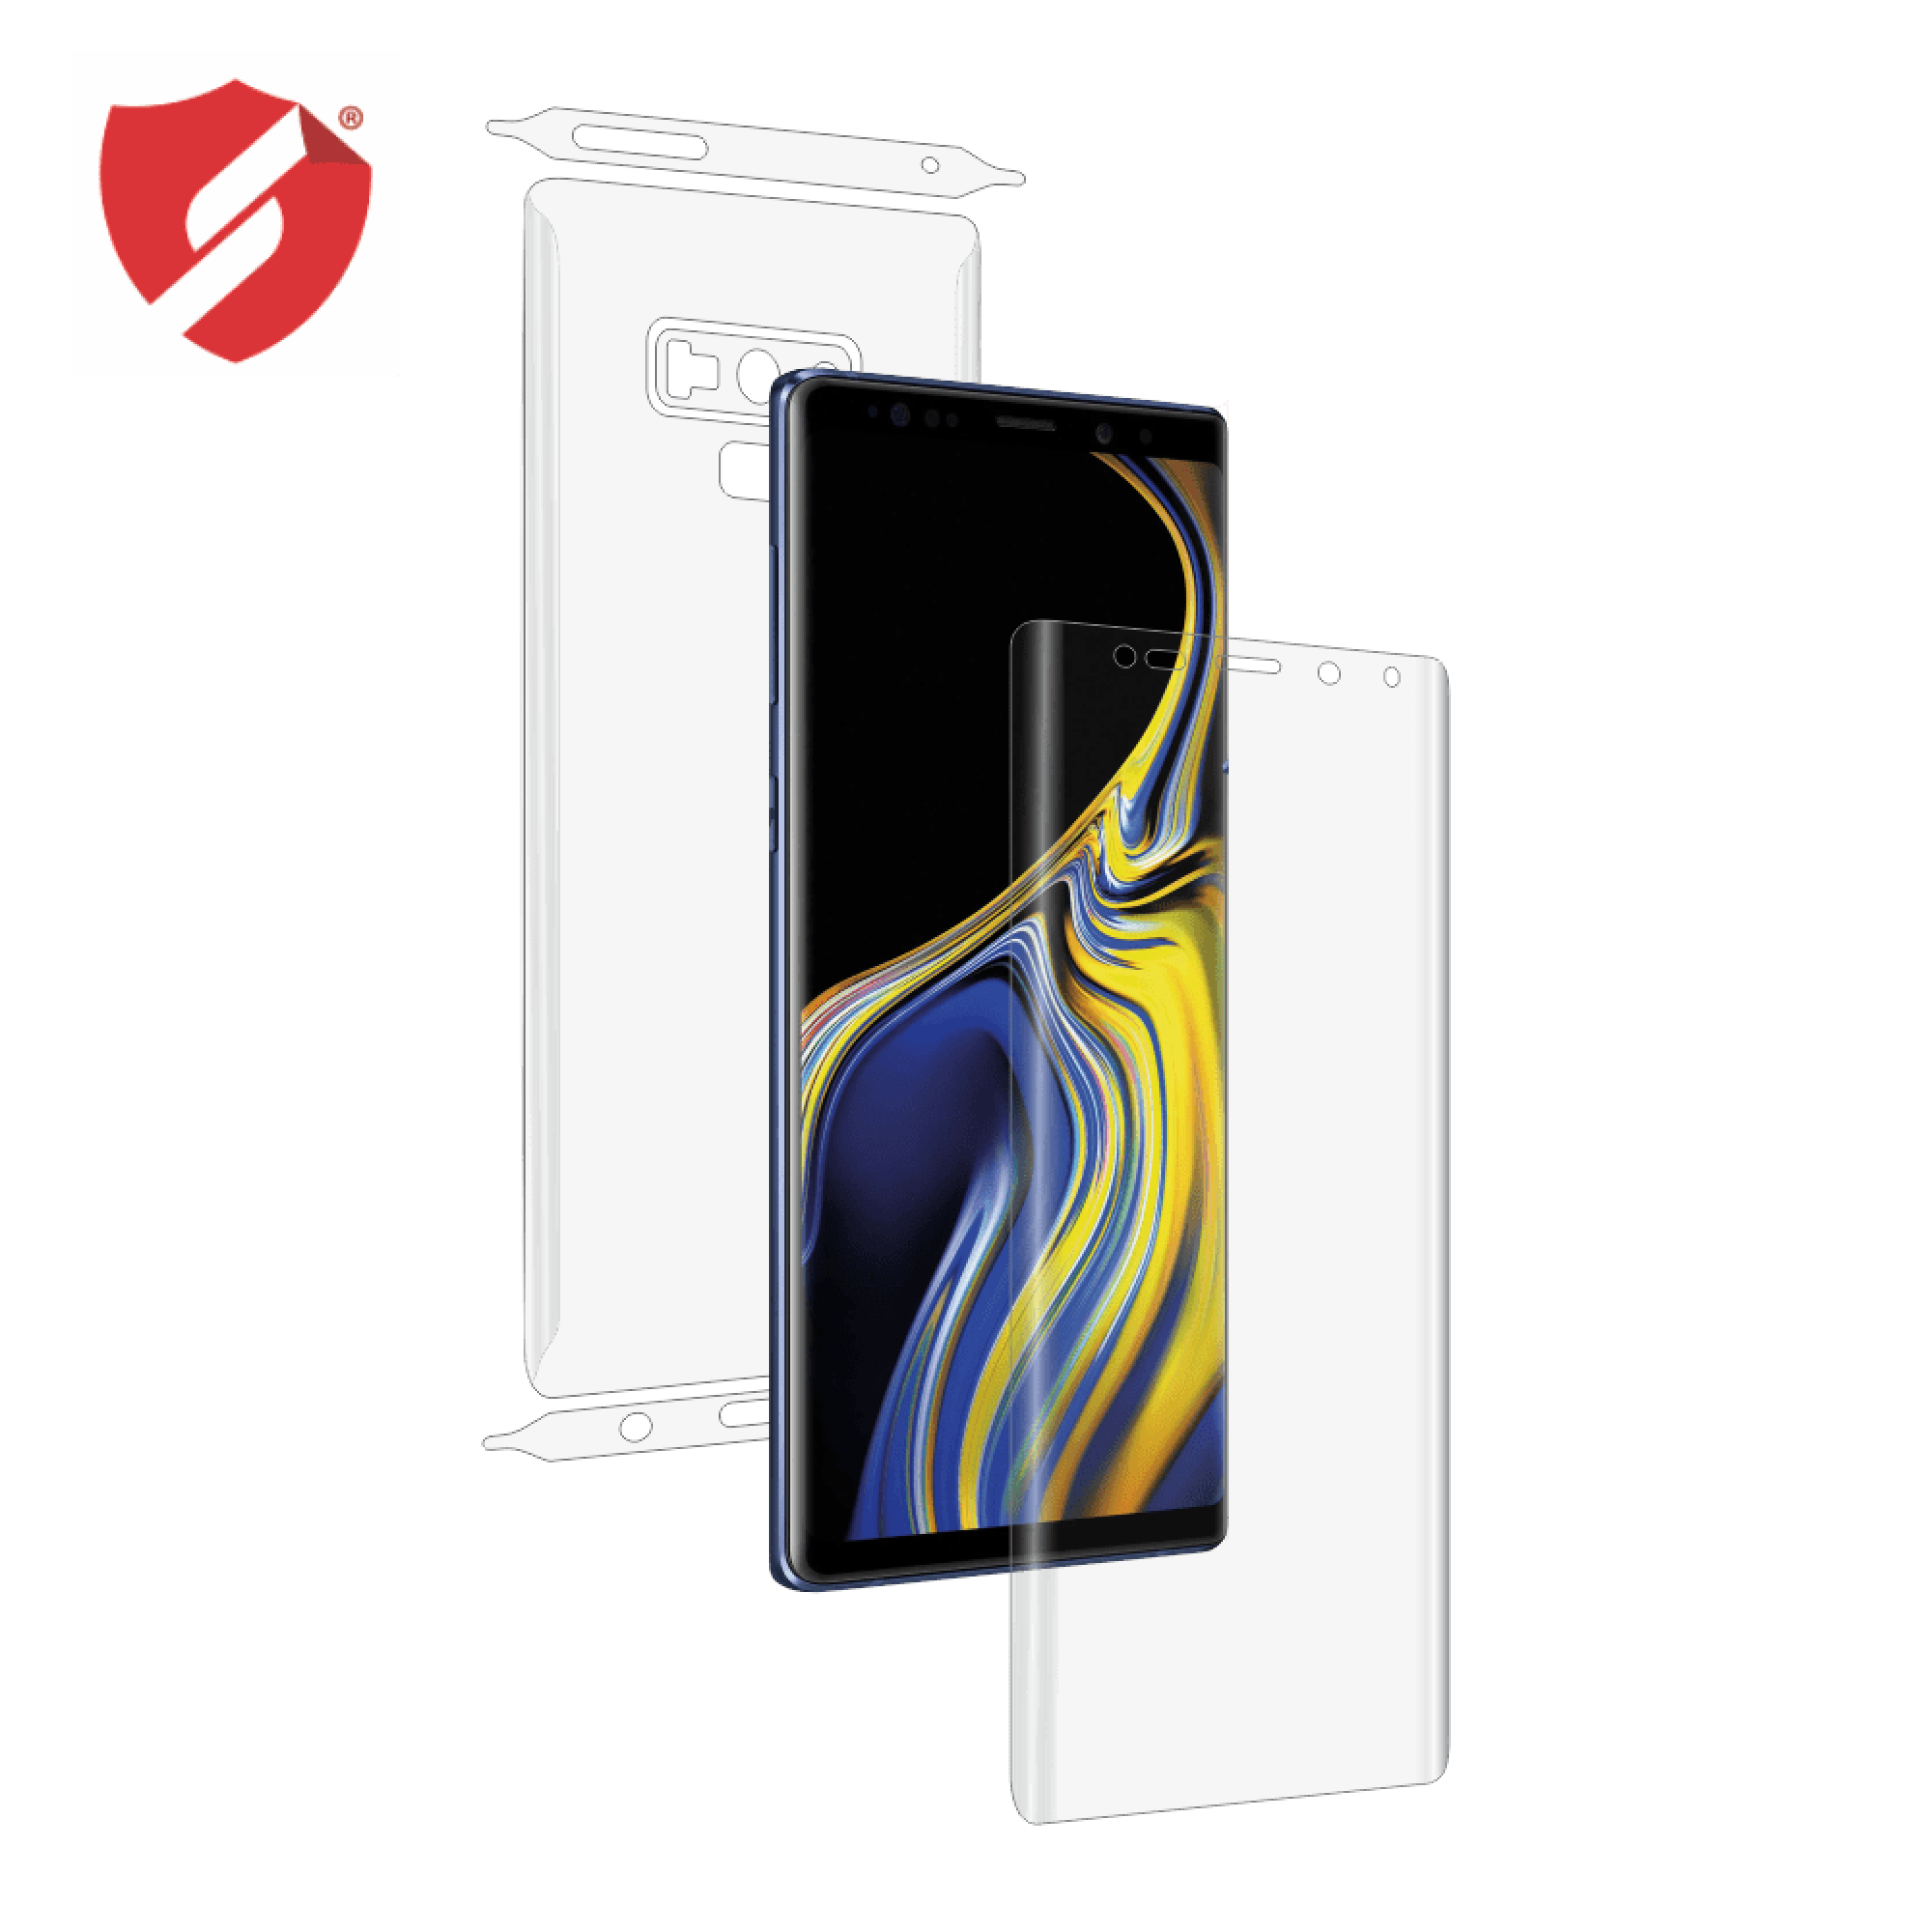 Folie de protectie Smart Protection Samsung Galaxy Note 9 compatibila cu carcasa LED View Cover - fullbody - display + spate + laterale imagine